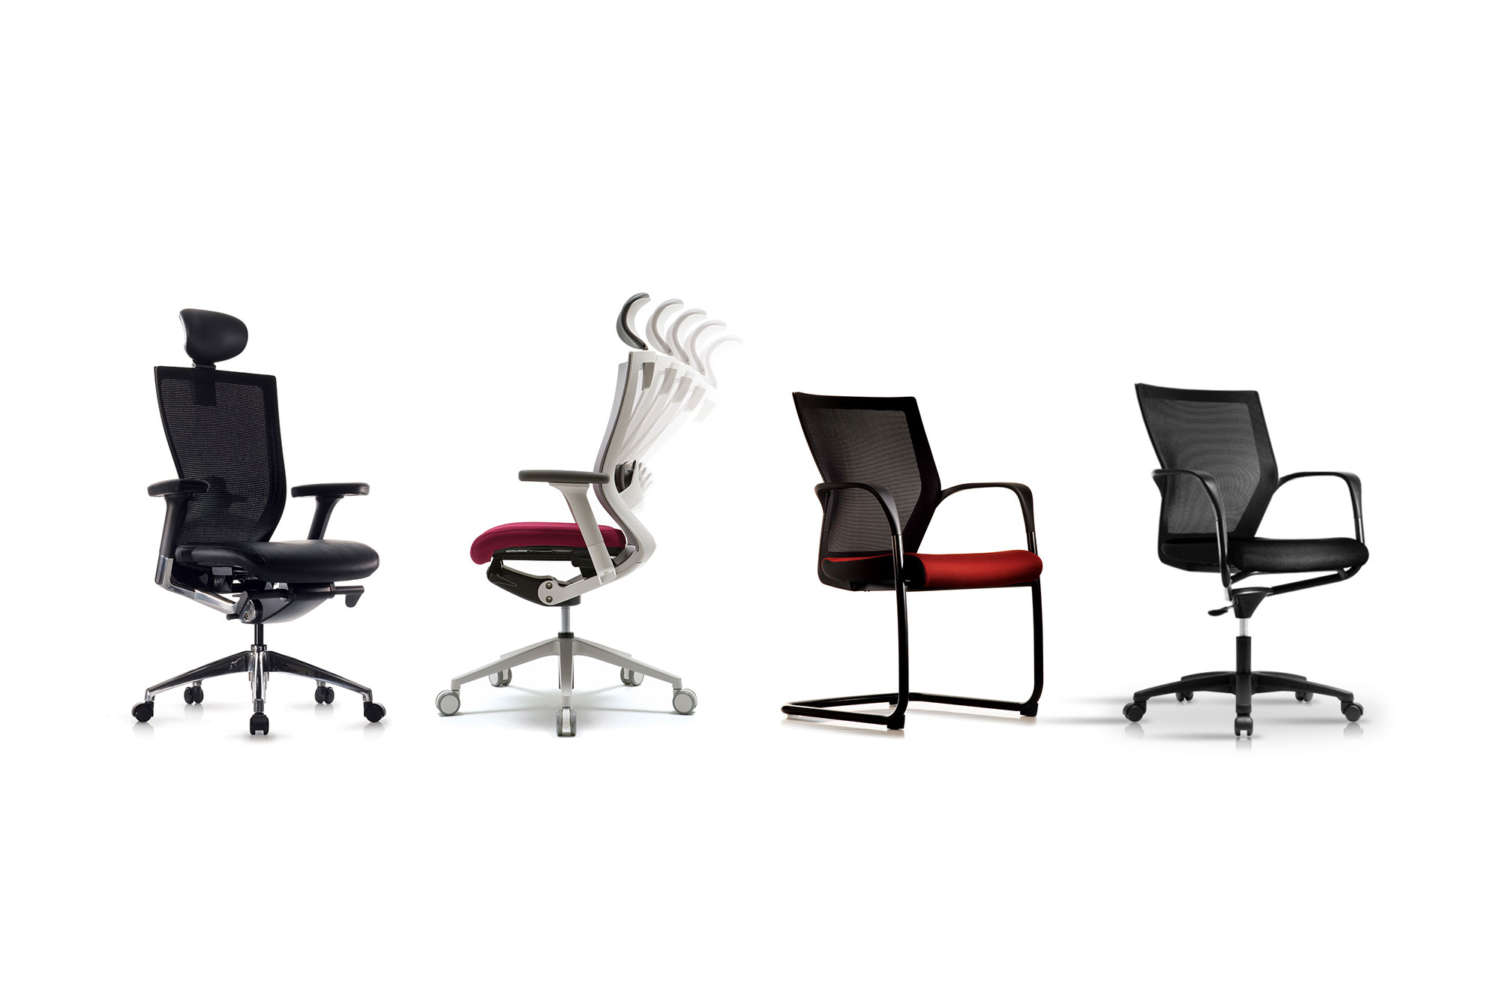 T50 series workspace chairs in different styles